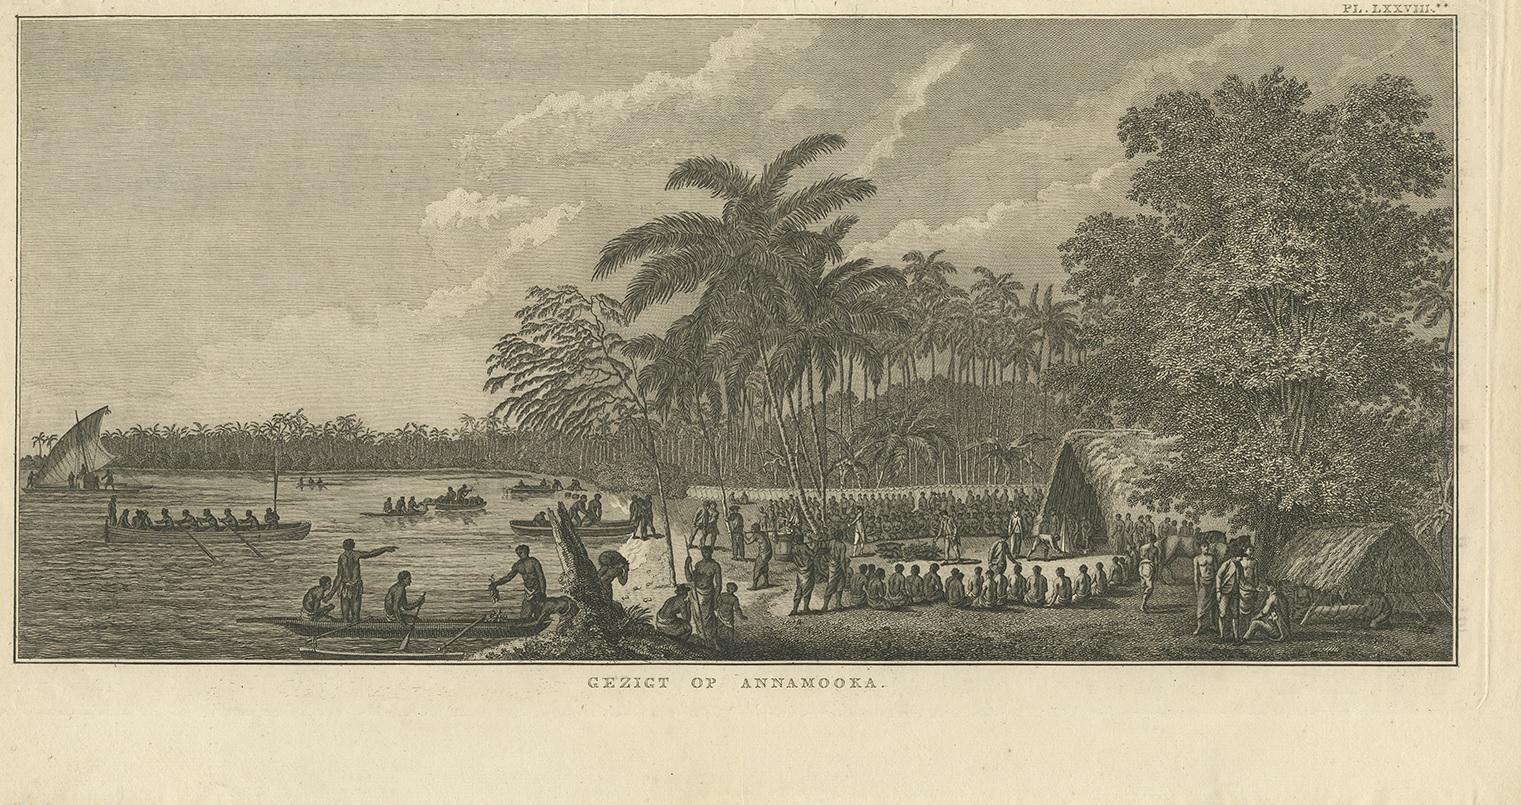 Antique print titled 'Gezigt op Annamooka'. This print depicts the Harbour of Annamooka, now Nomuka, part of the Ha’apai group of Tonga. Originates from 'Reizen rondom de Waereld' by J. Cook. Translated by J.D. Pasteur. Published by Honkoop, Allart